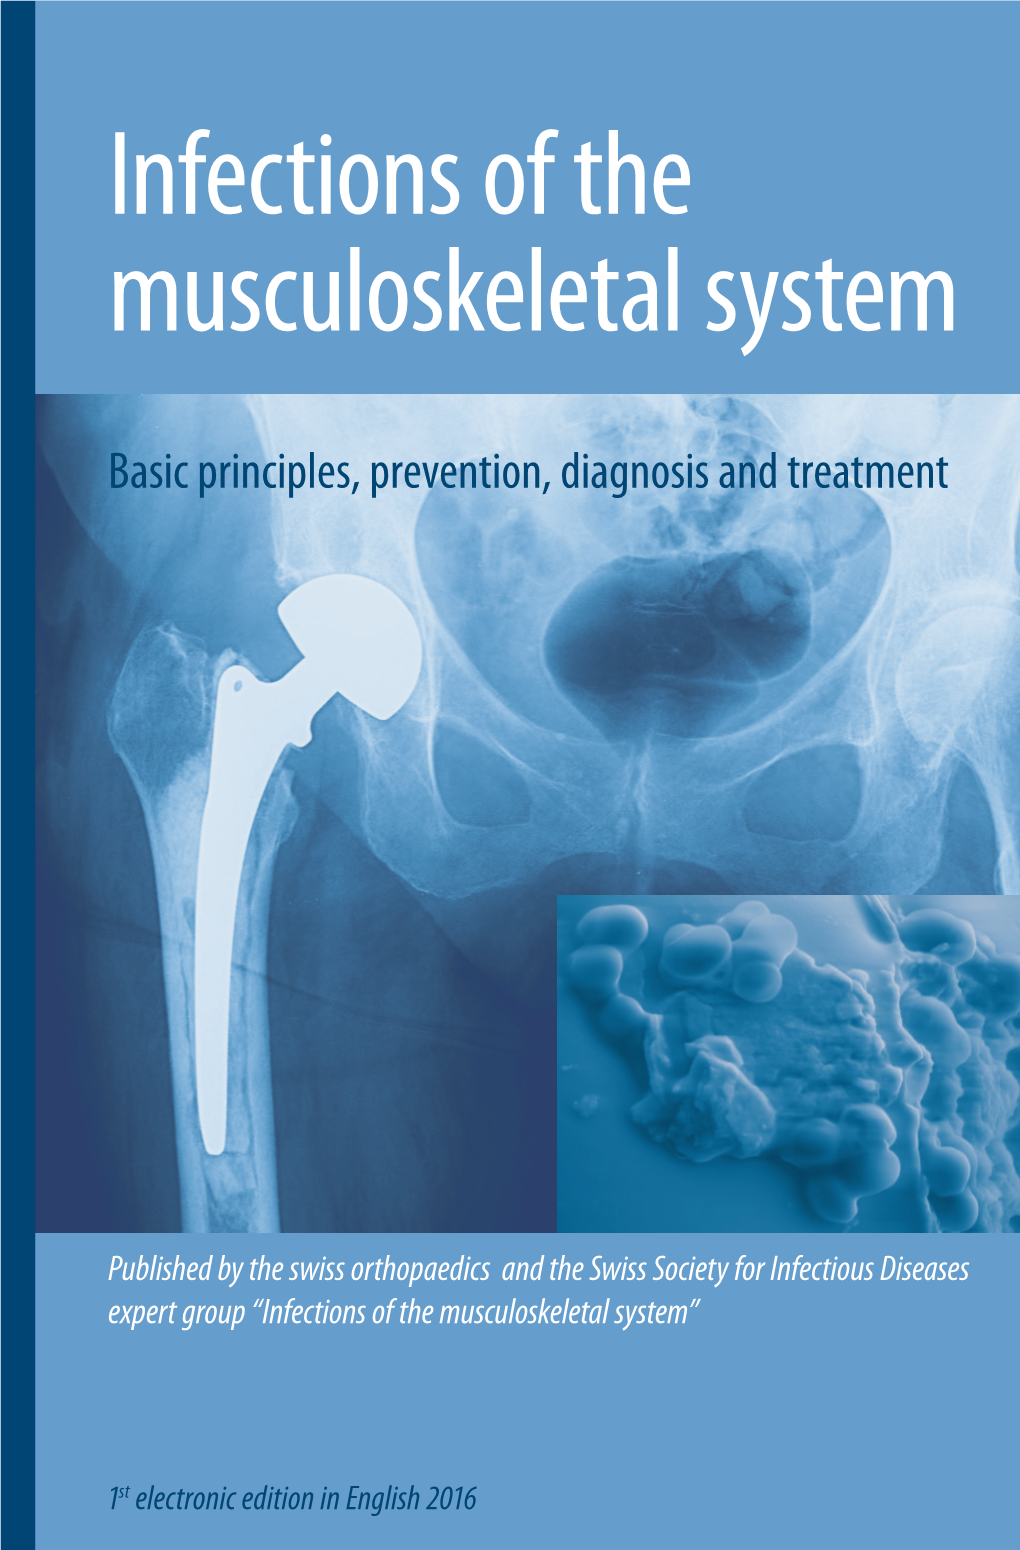 Infections of the Musculoskeletal System”